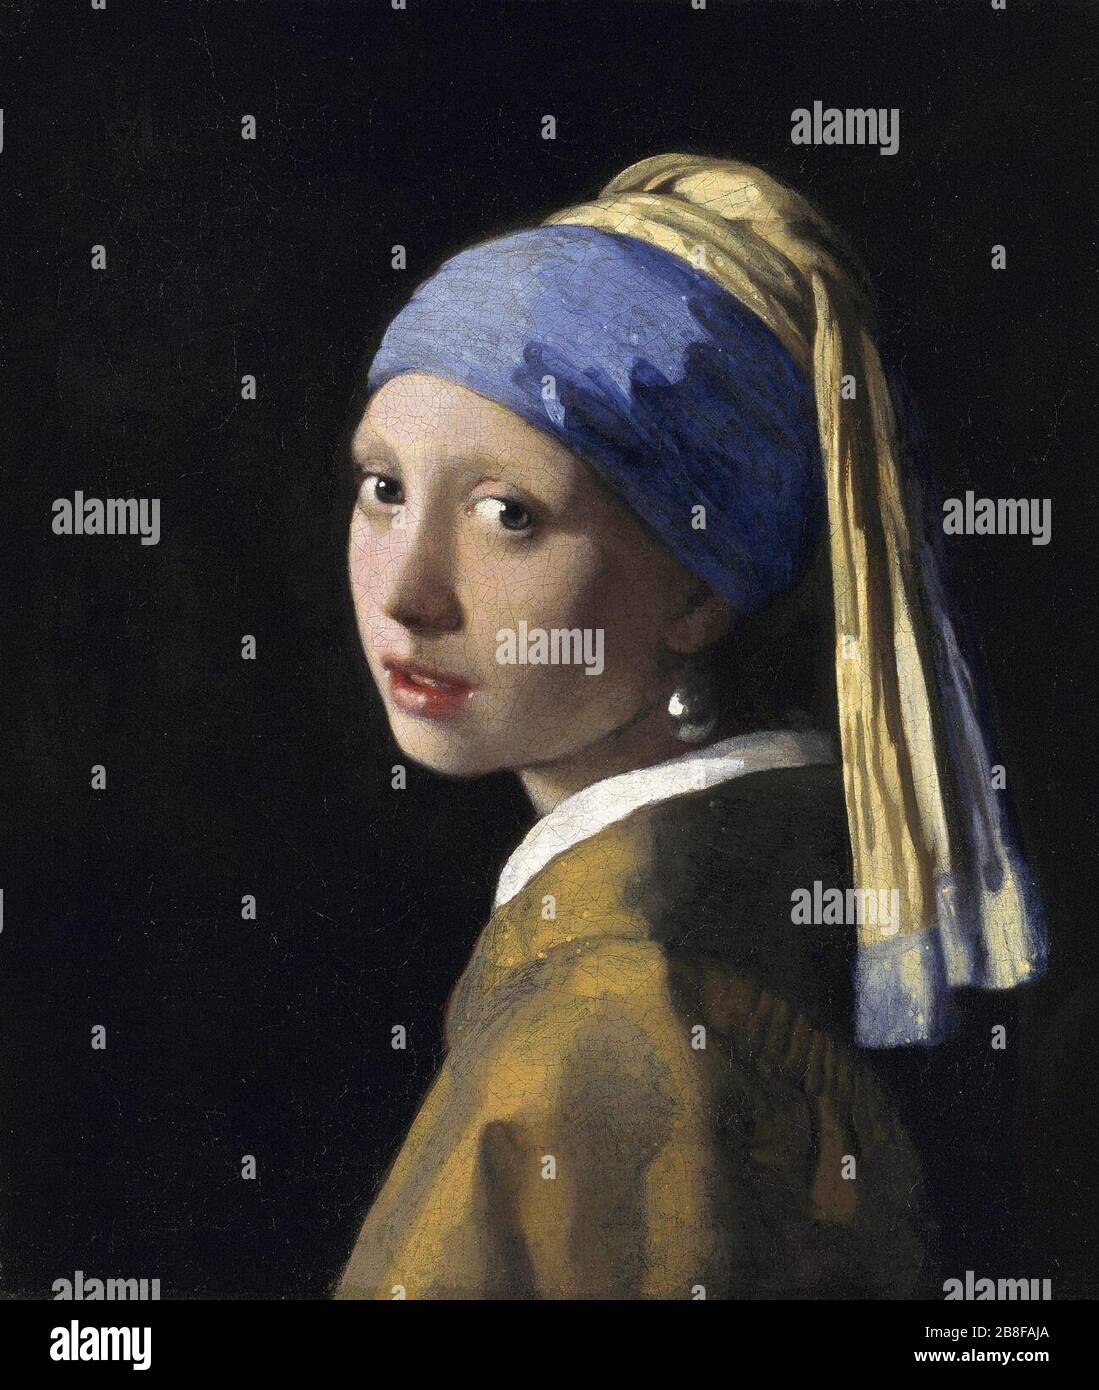 Girl with a Pearl Earring. Stock Photo